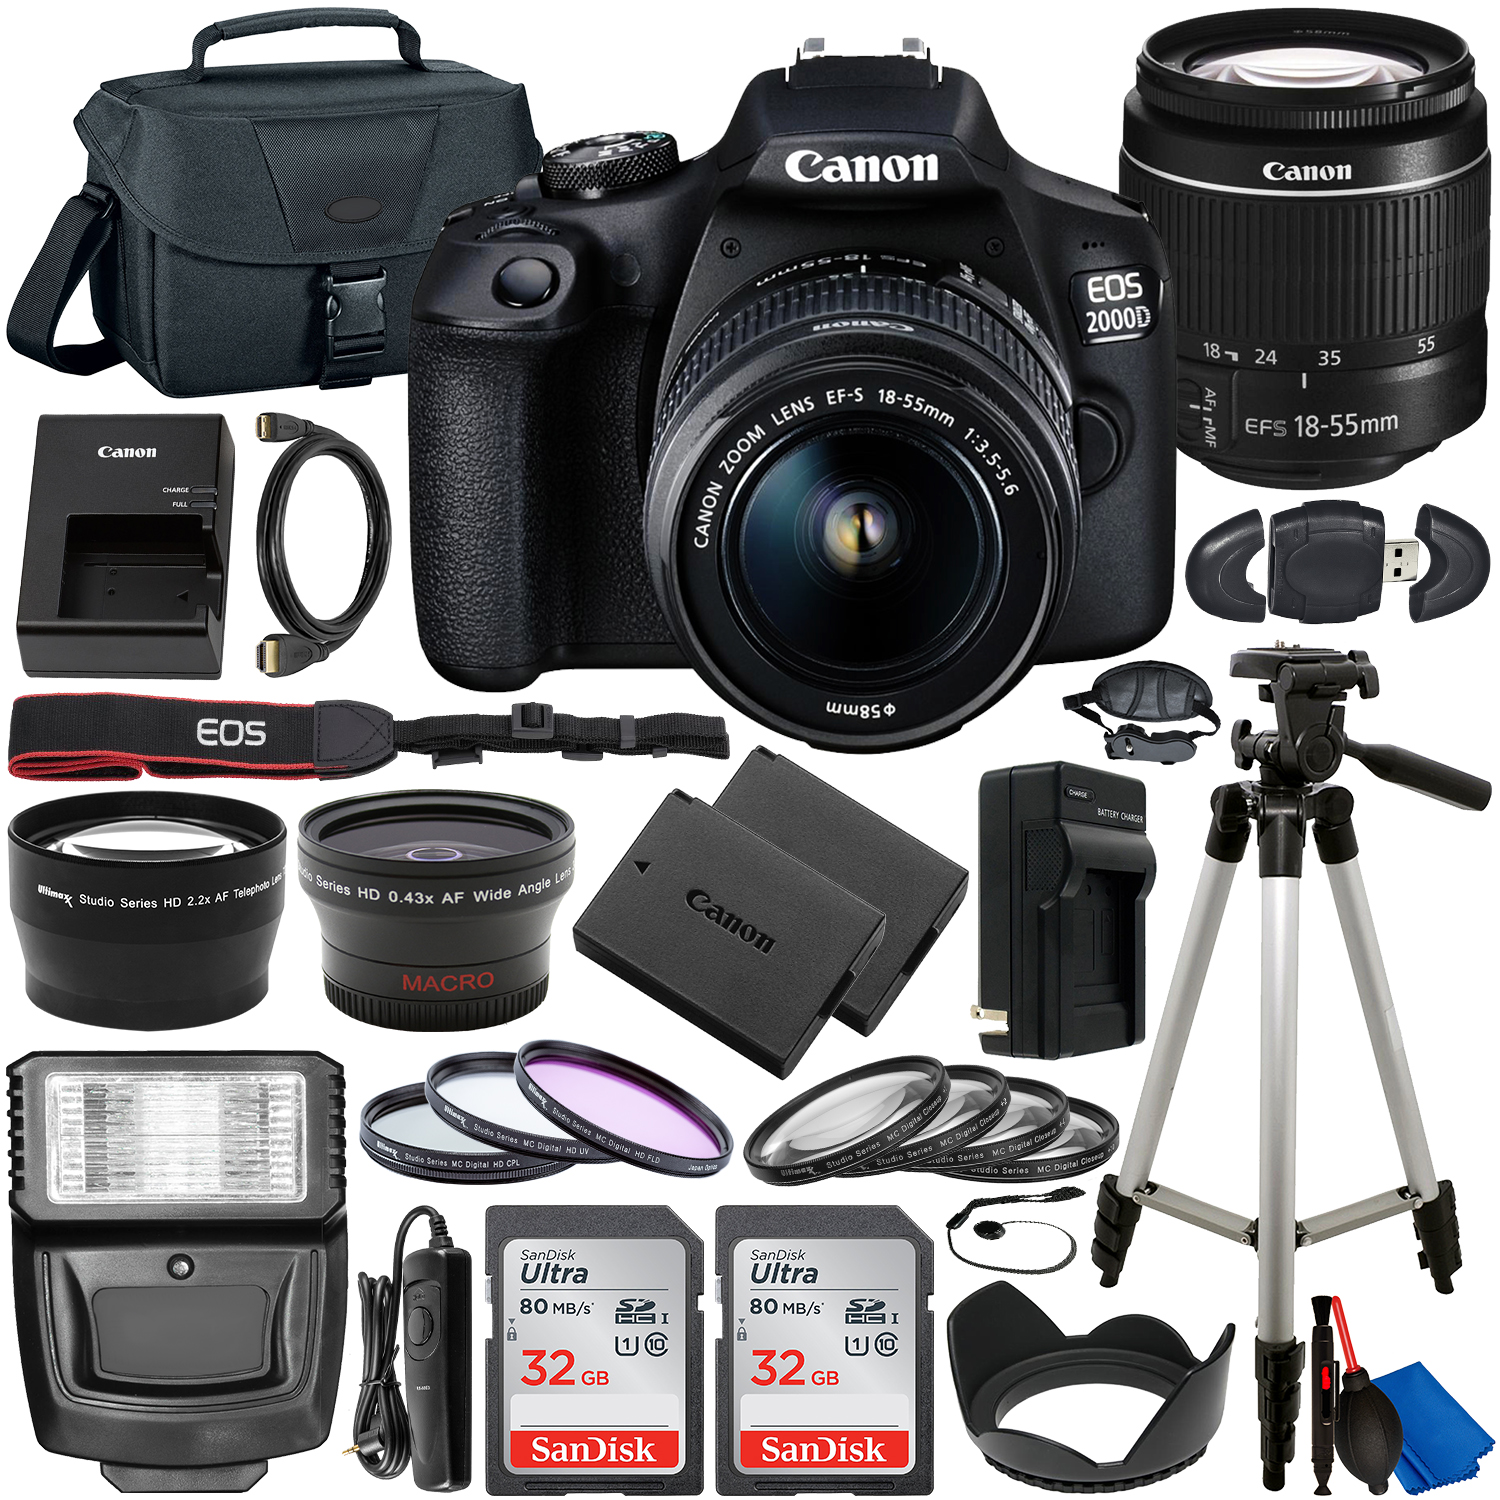 Canon EOS 2000D (Rebel T7) DSLR Camera with EF-S 18-55mm f/3.5-5.6 DC III Lens & Deluxe Accessory Bundle – Includes: 2x SanDisk Ultra 32GB SDHC Memory Card,   Battery, Carrying Case & MORE